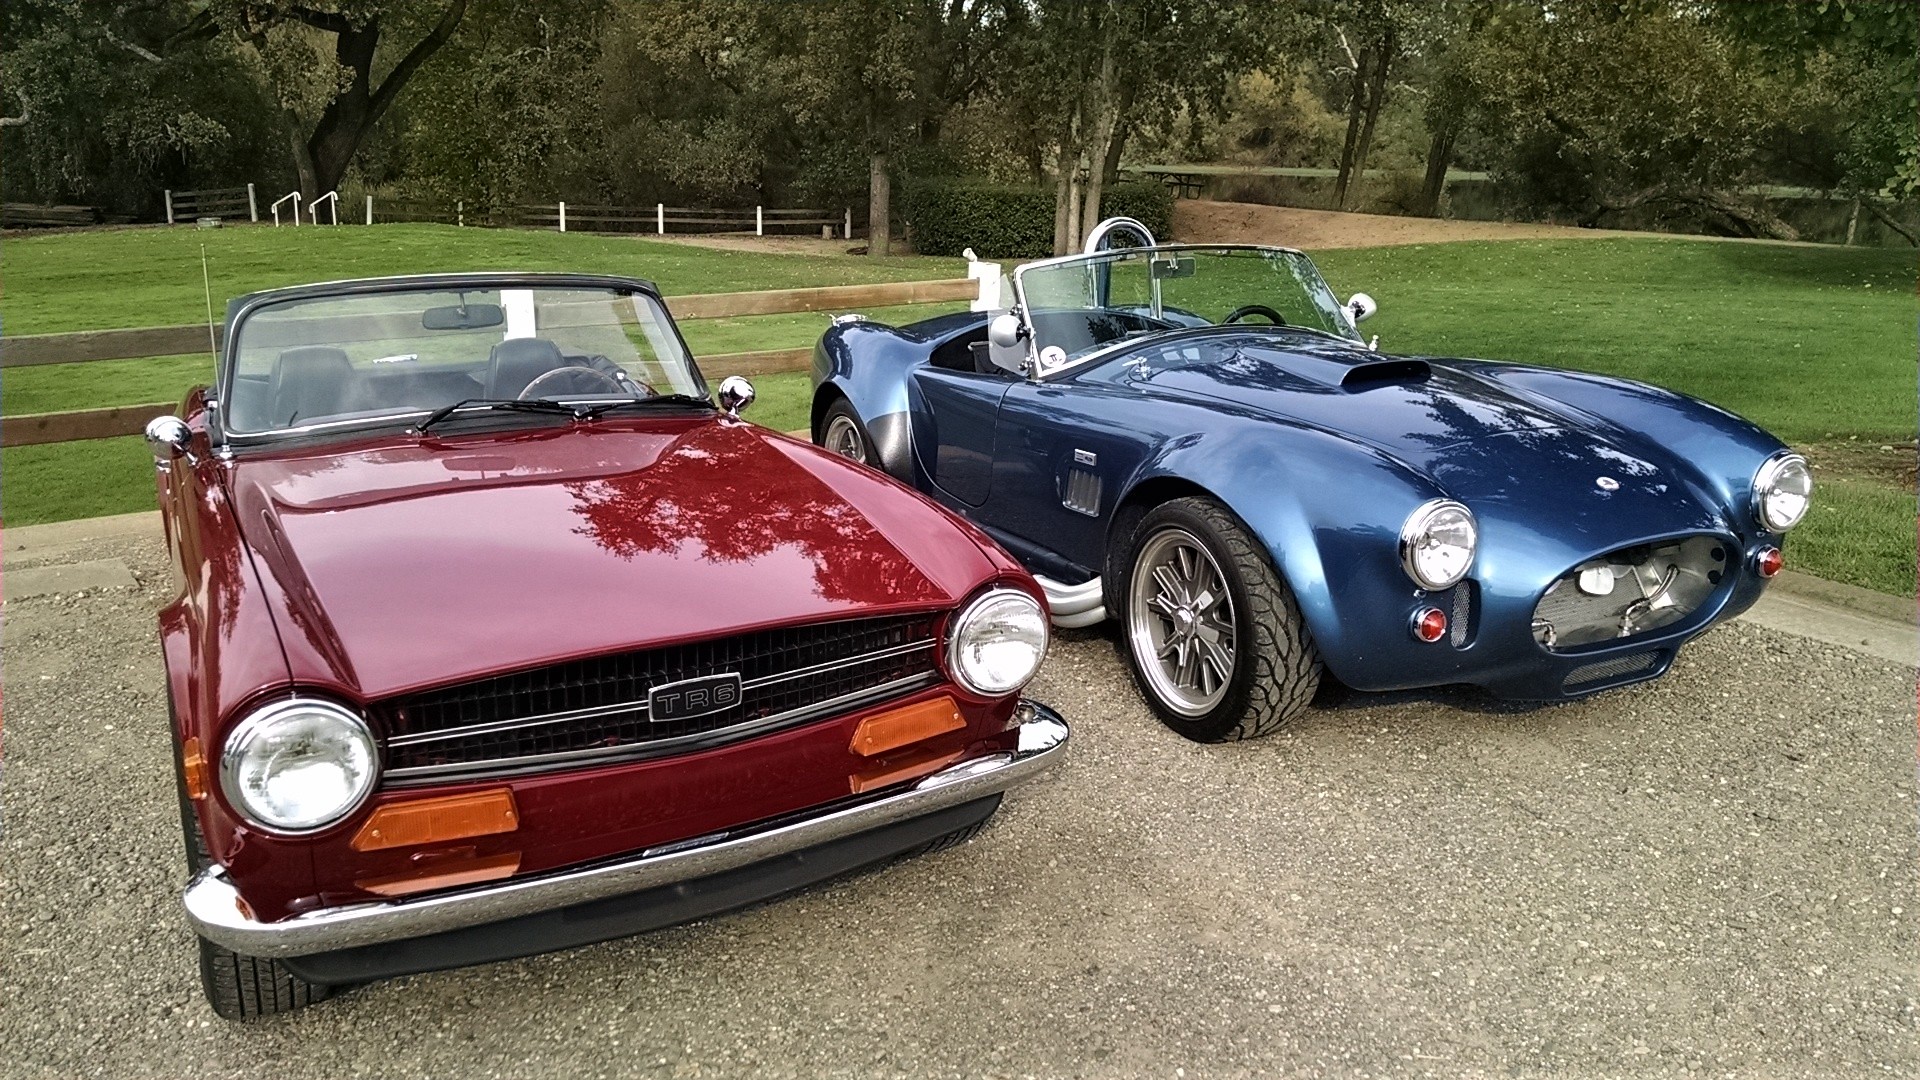 Red Triumph TR6 and blue classic car